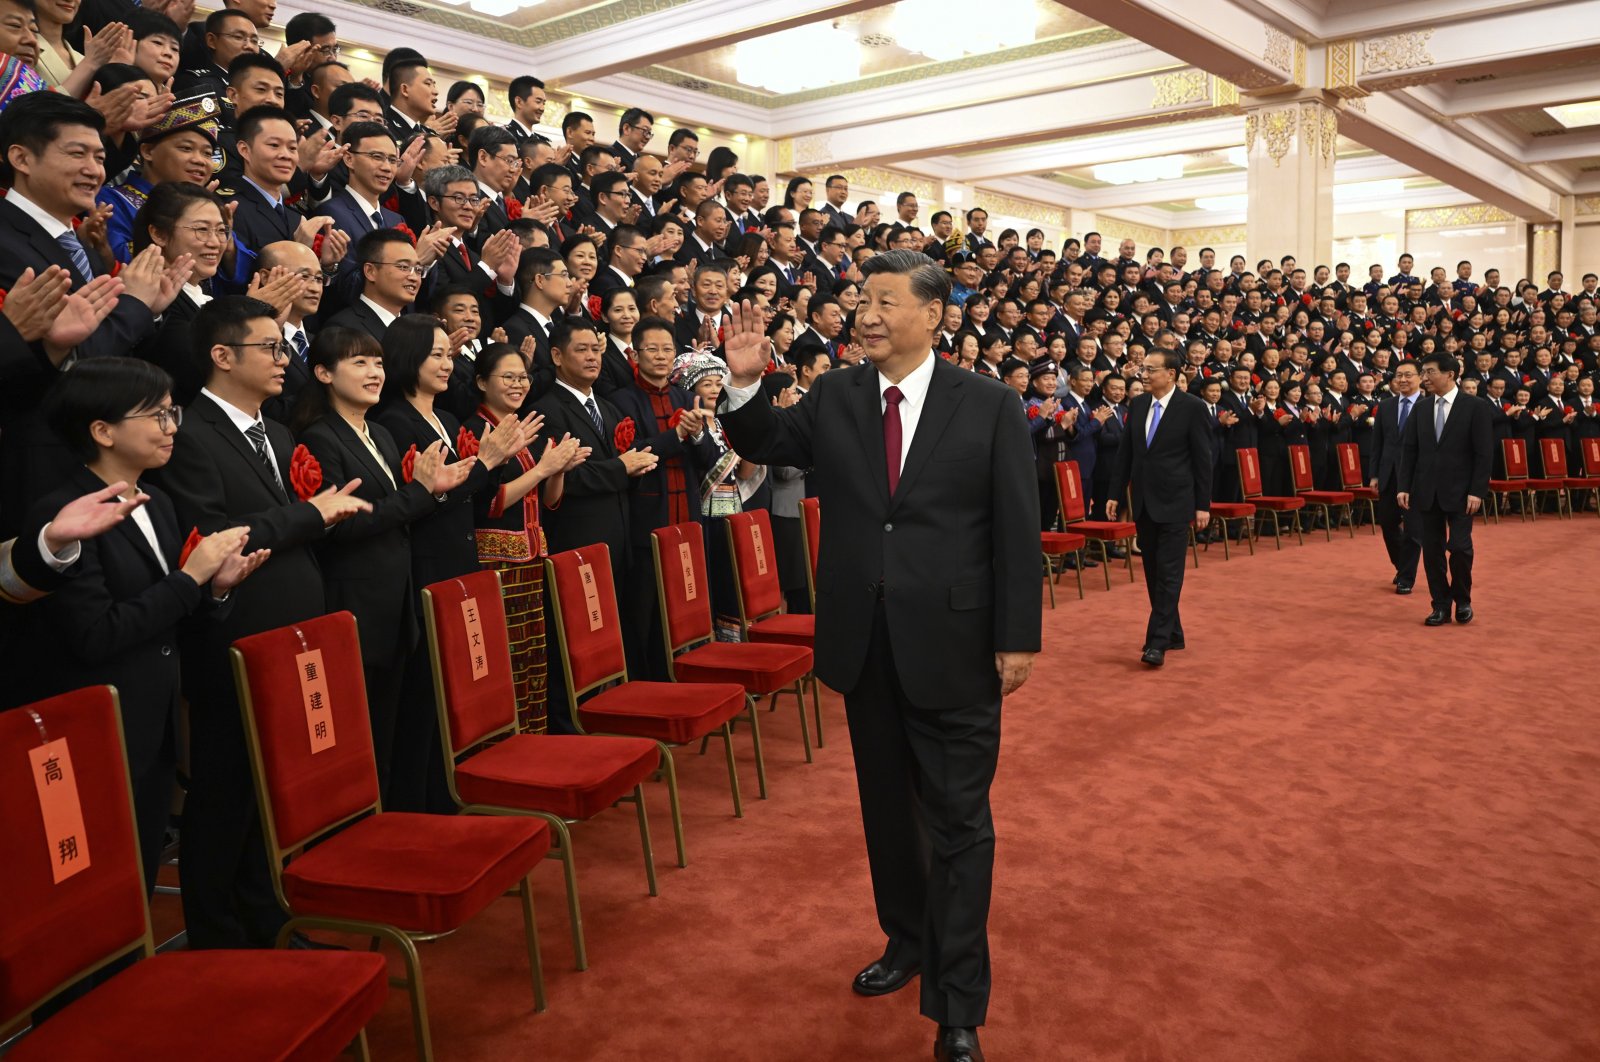 Chinese President Xi Jinping (C) meets with representatives of model civil servants during a national award ceremony held at the Great Hall of the People, Beijing, China, Aug. 30, 2022. (AP Photo)